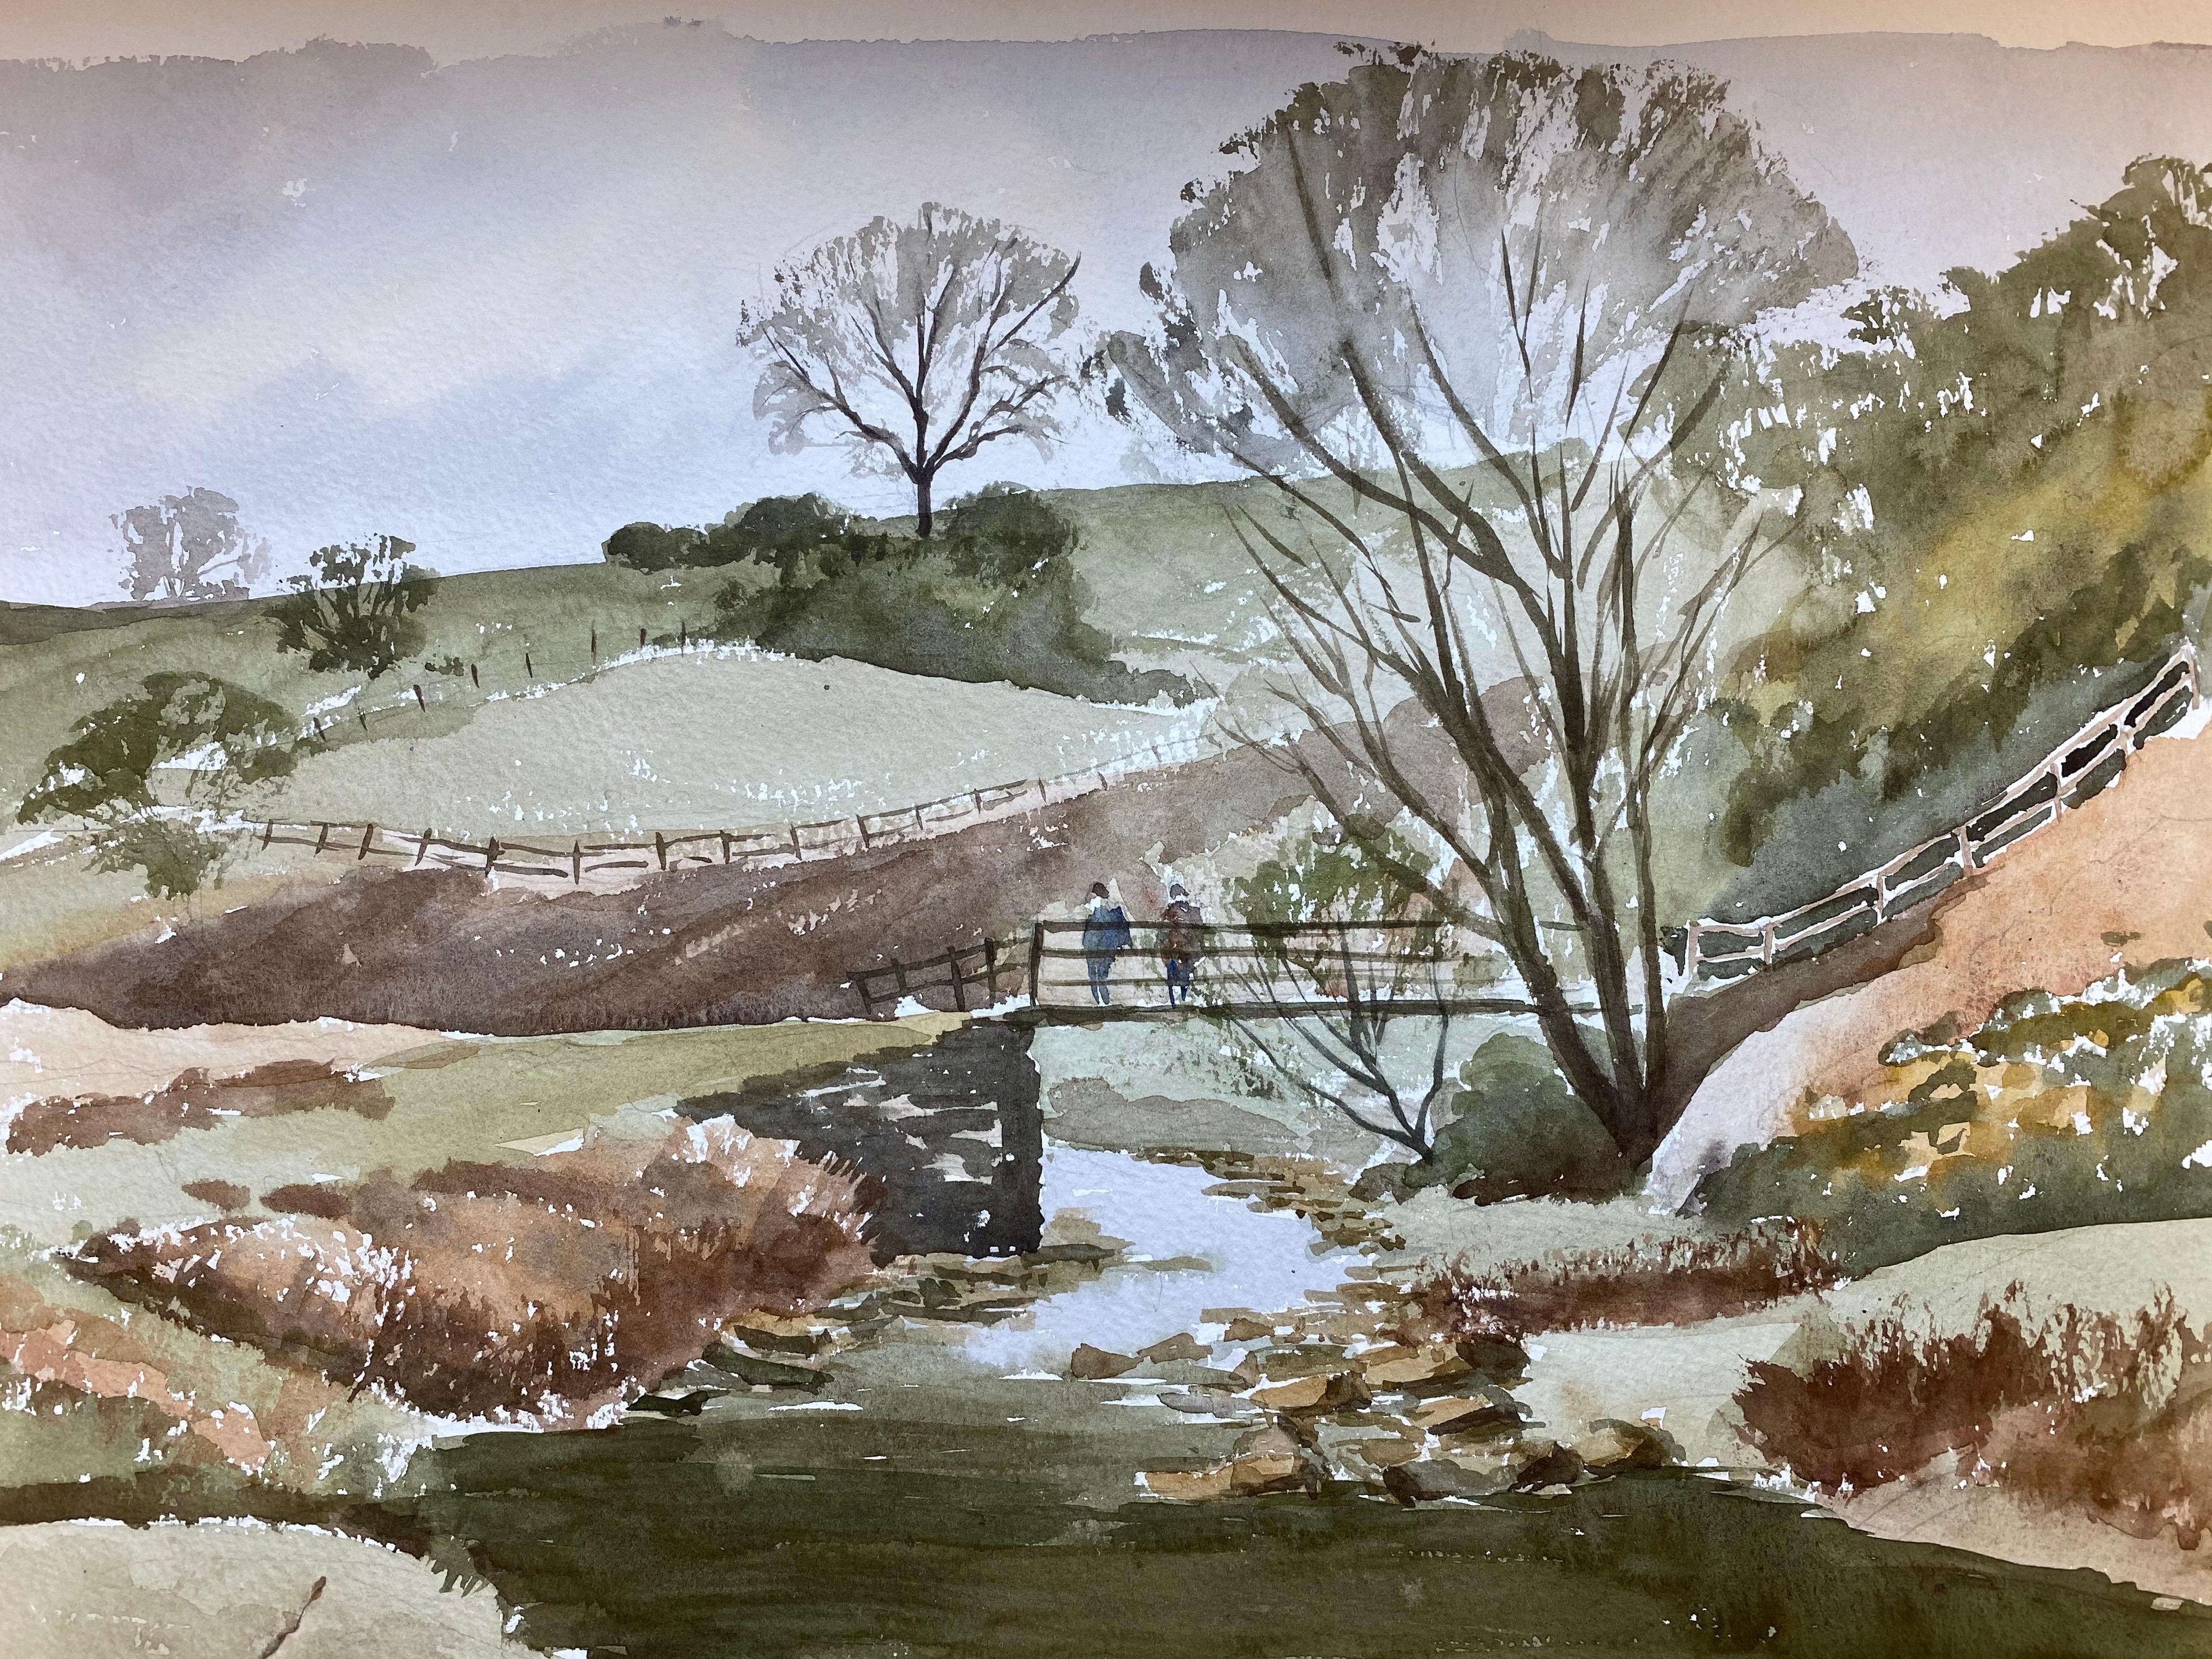 Rural River Countryside Landscape original British watercolour painting - Painting by Ronald Birch